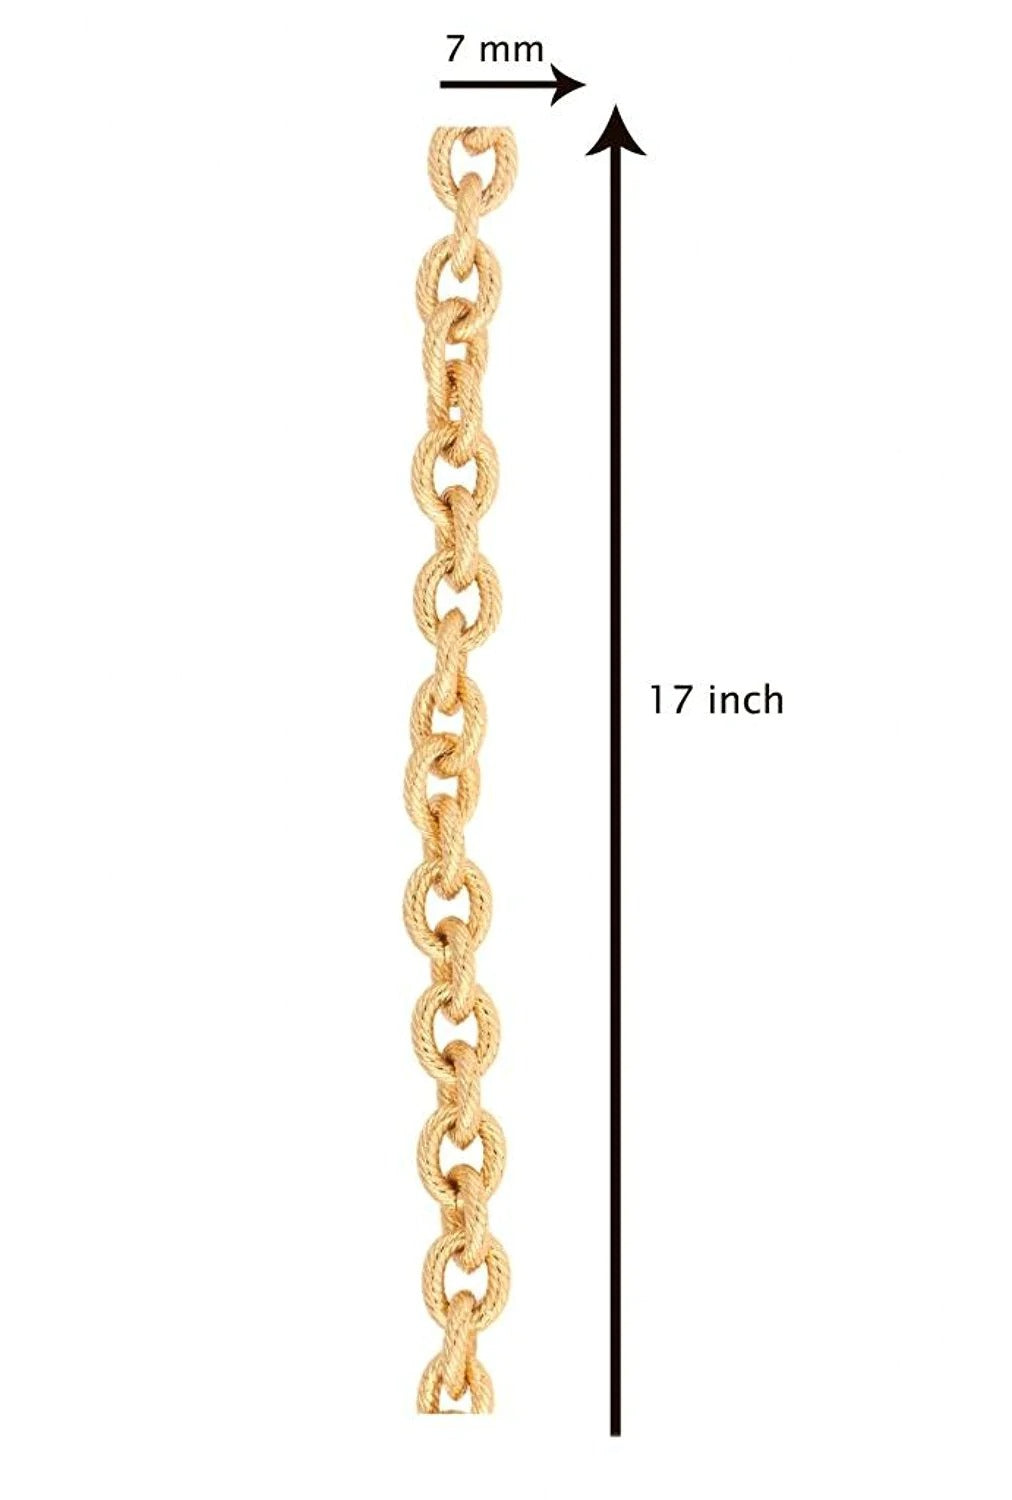 Gold-Plated Oval Belcher Anchor Links Chain, 18" for Men and Women